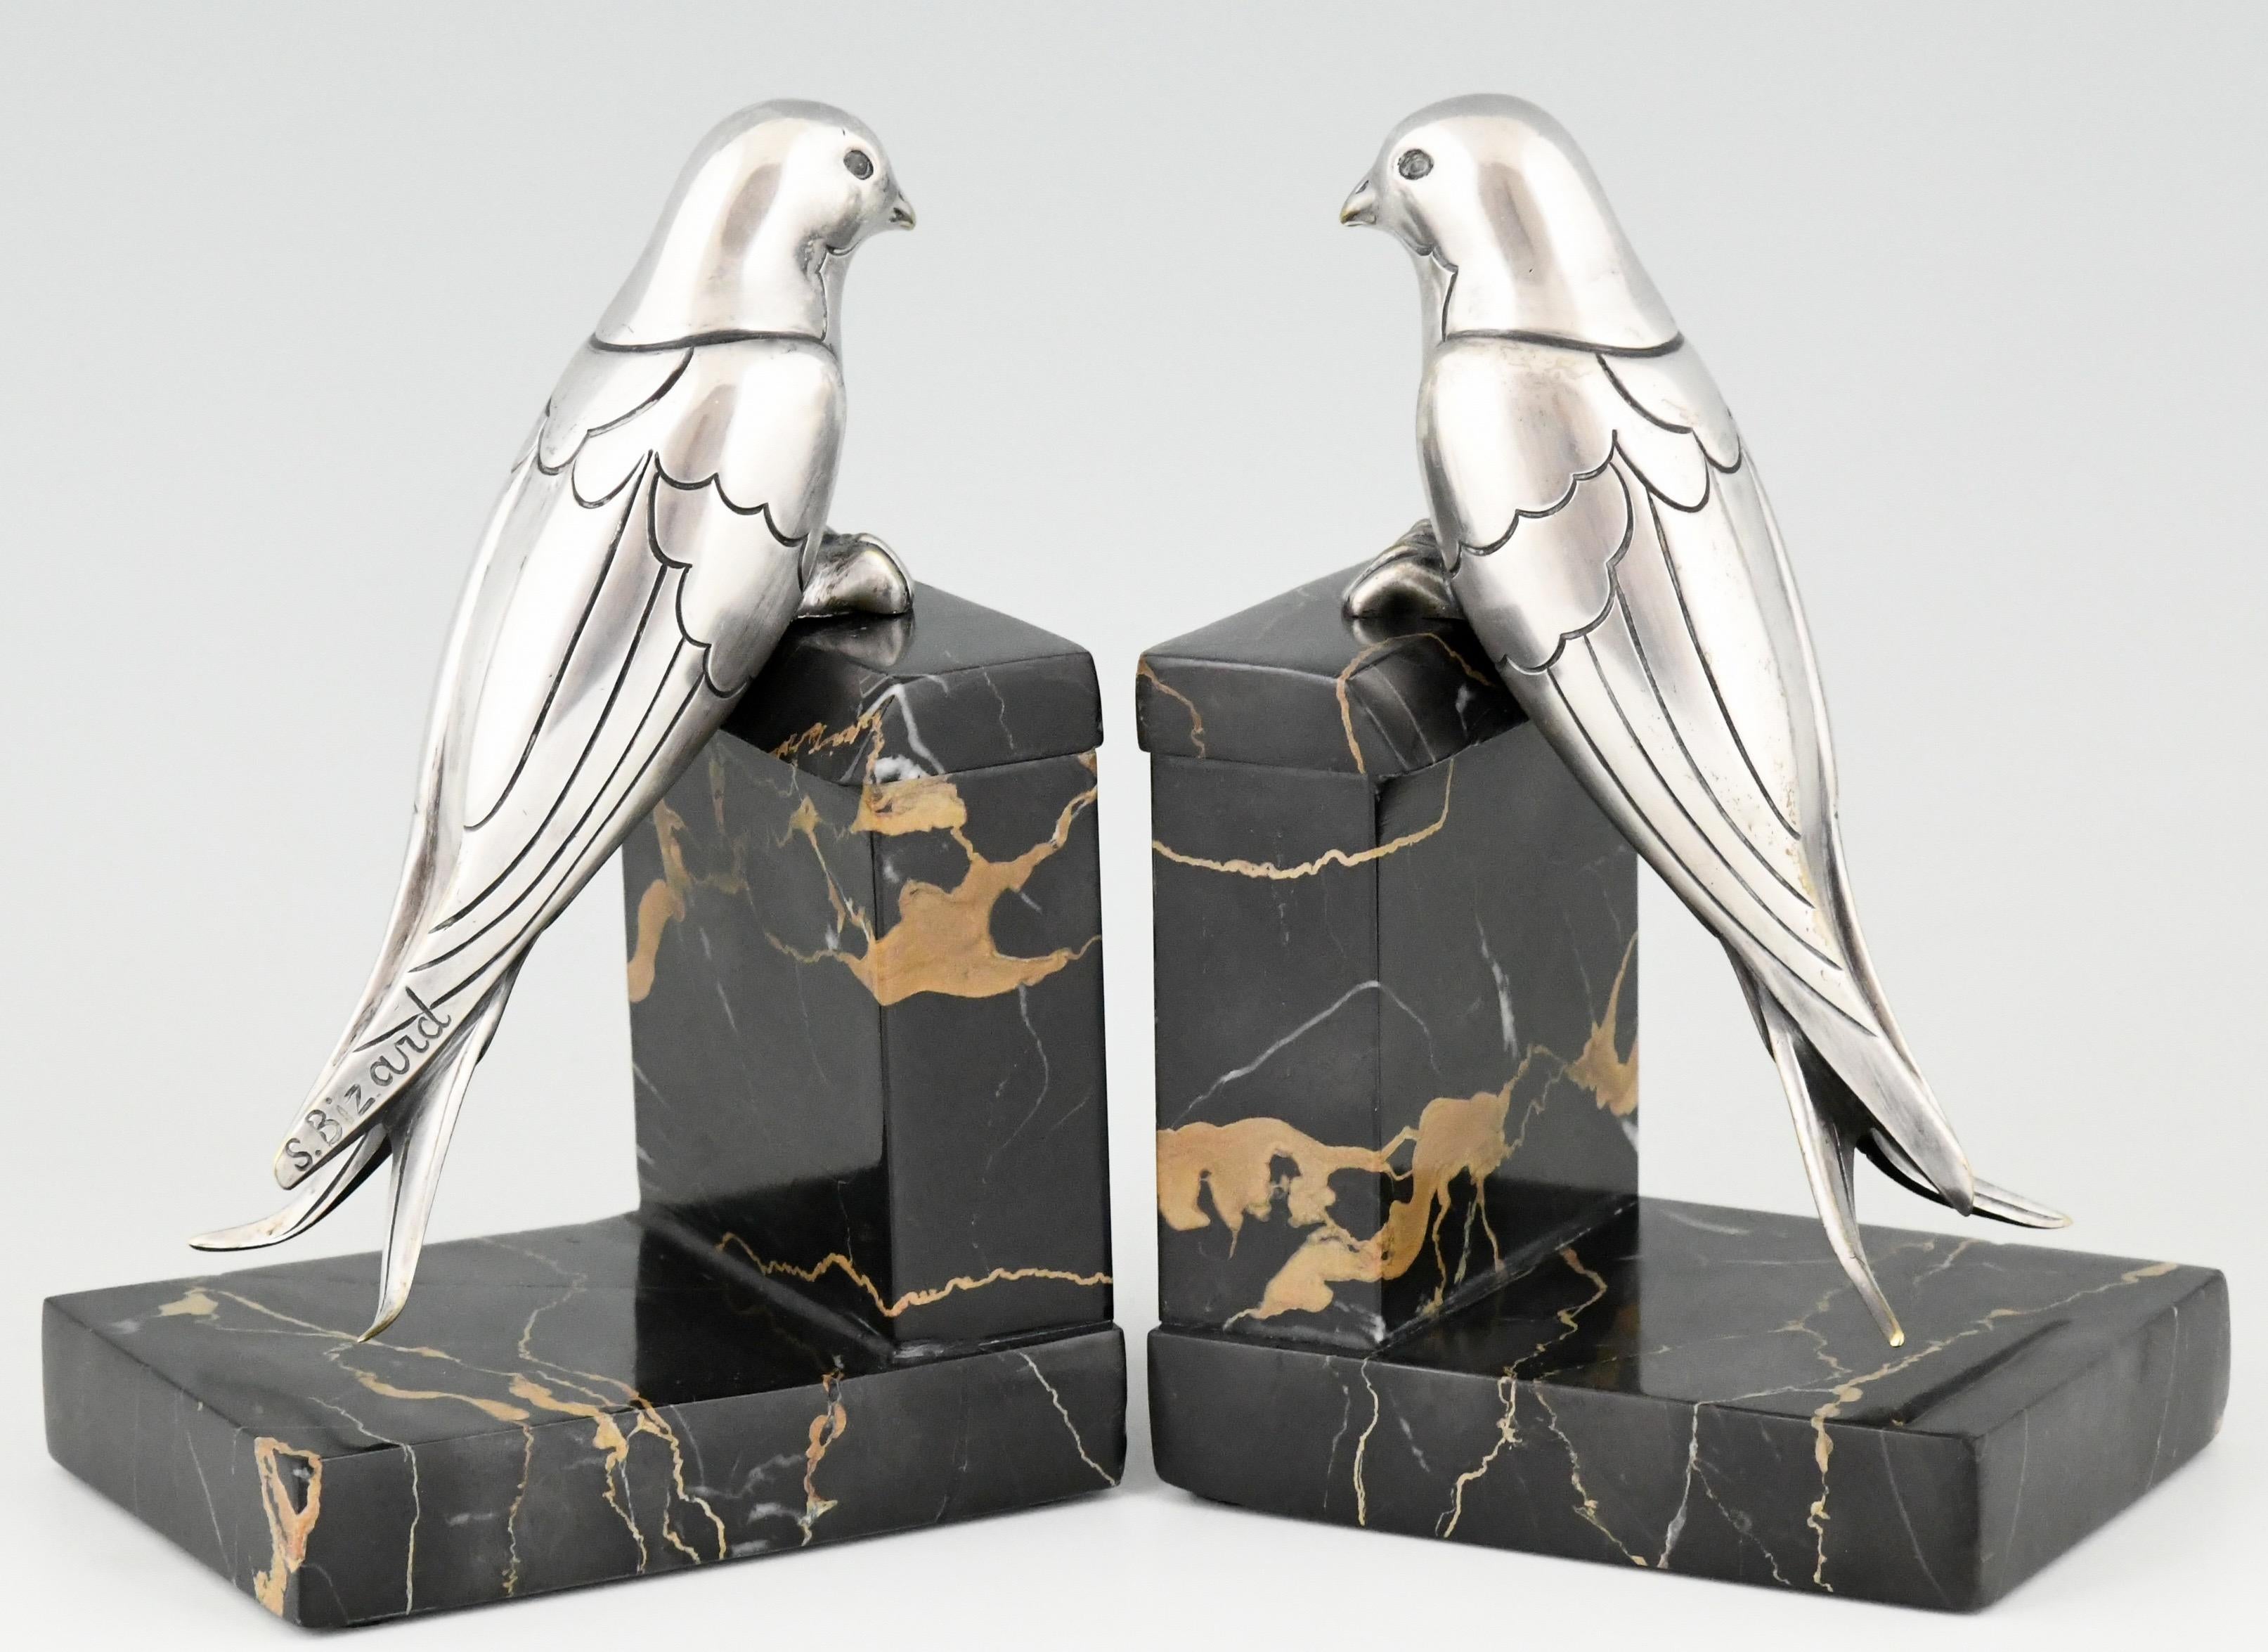 Lovely pair of Art Deco silvered bronze swalow bookends by the French artist Suzanne Bizard, Ca 1930.
The bird sculptures are mounted on Portor marble base.
Literature:
“Art Deco and other figures” by Brian Catley, Antique collectors club.